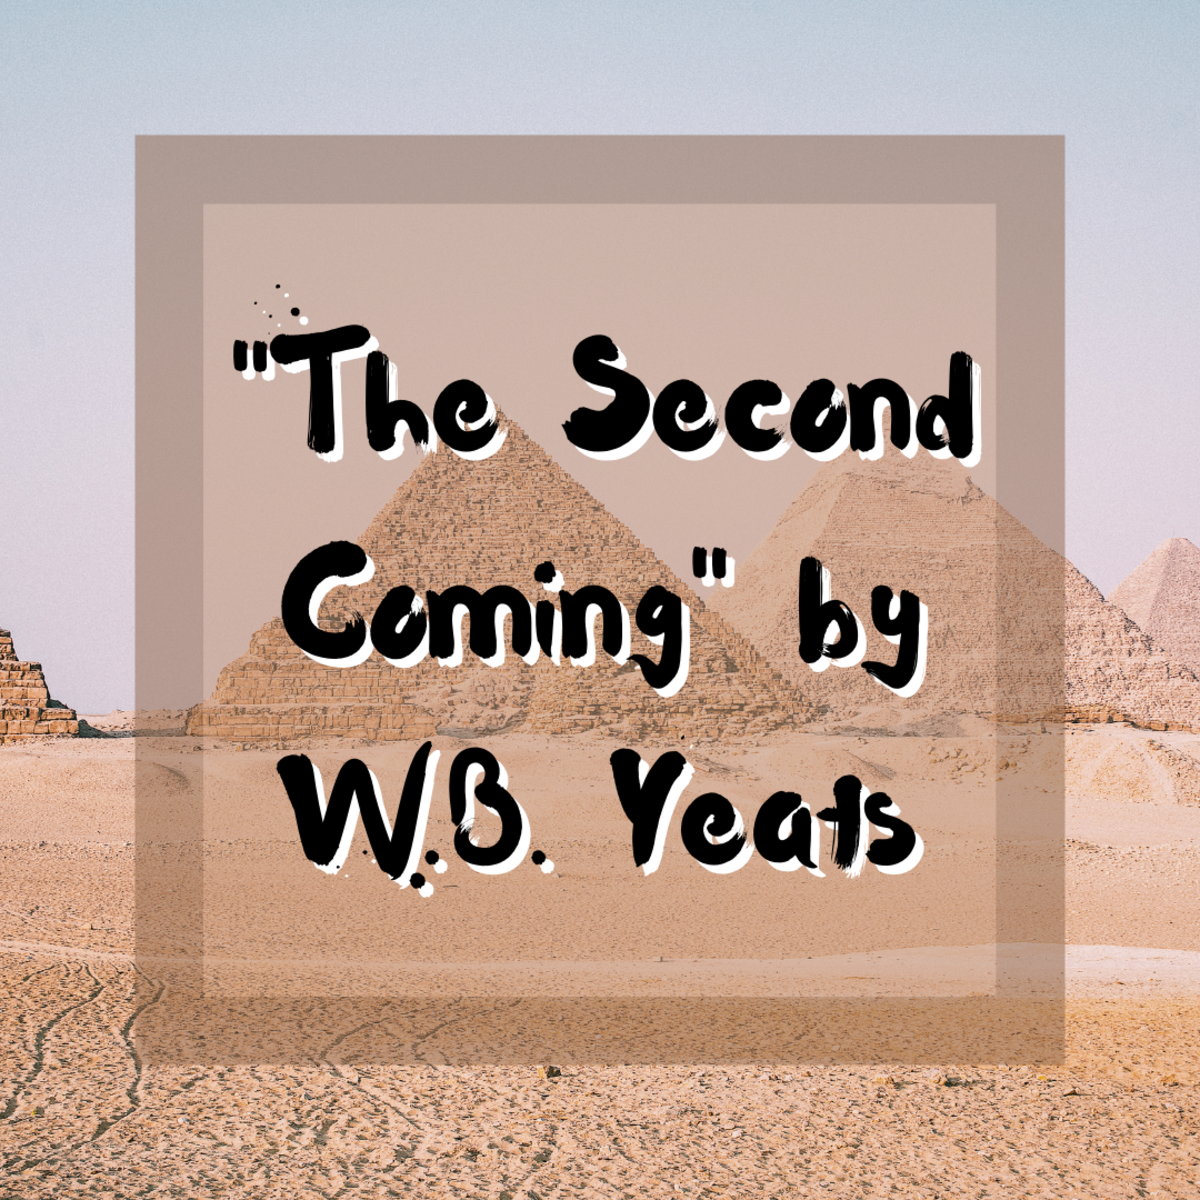 This article provides a summary and analysis of William Butler Yeats's famous poem 'The Second Coming'.